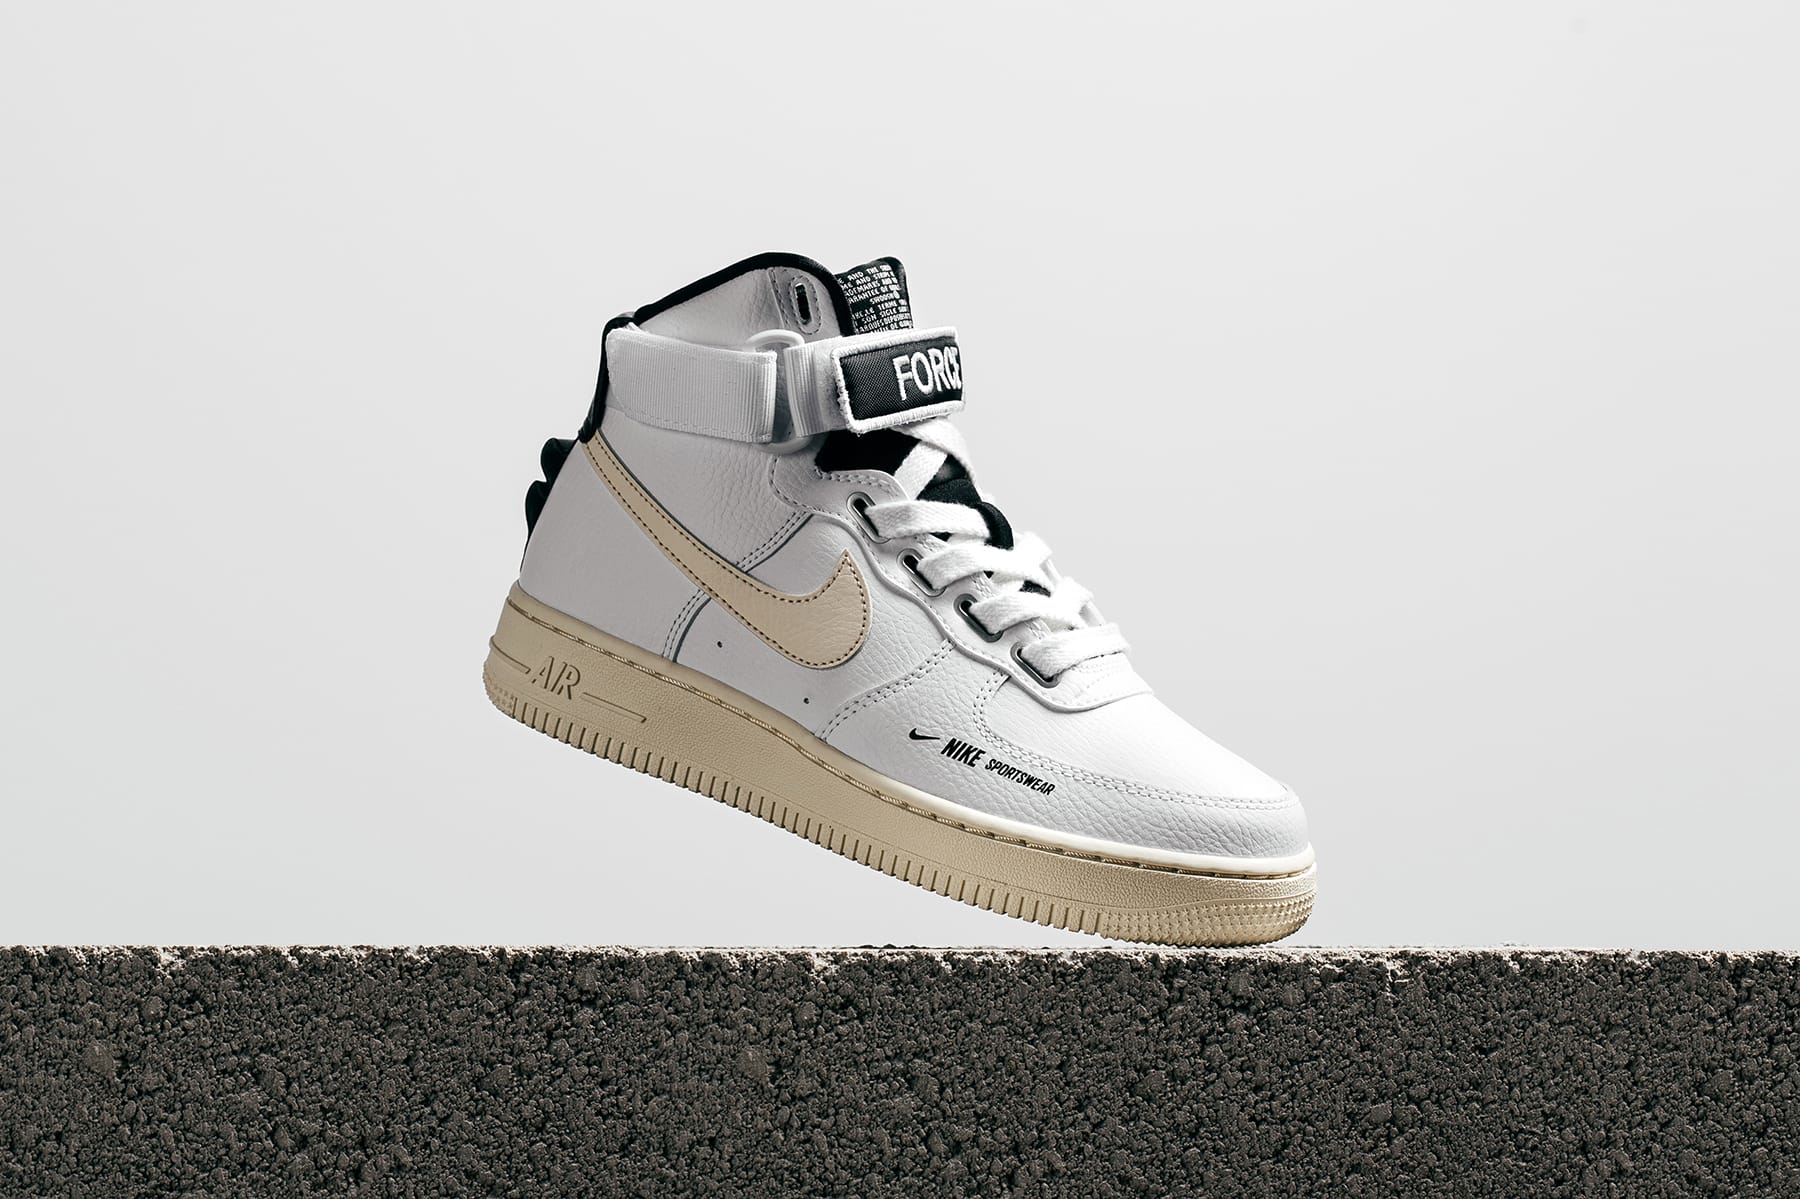 nike high top with velcro strap